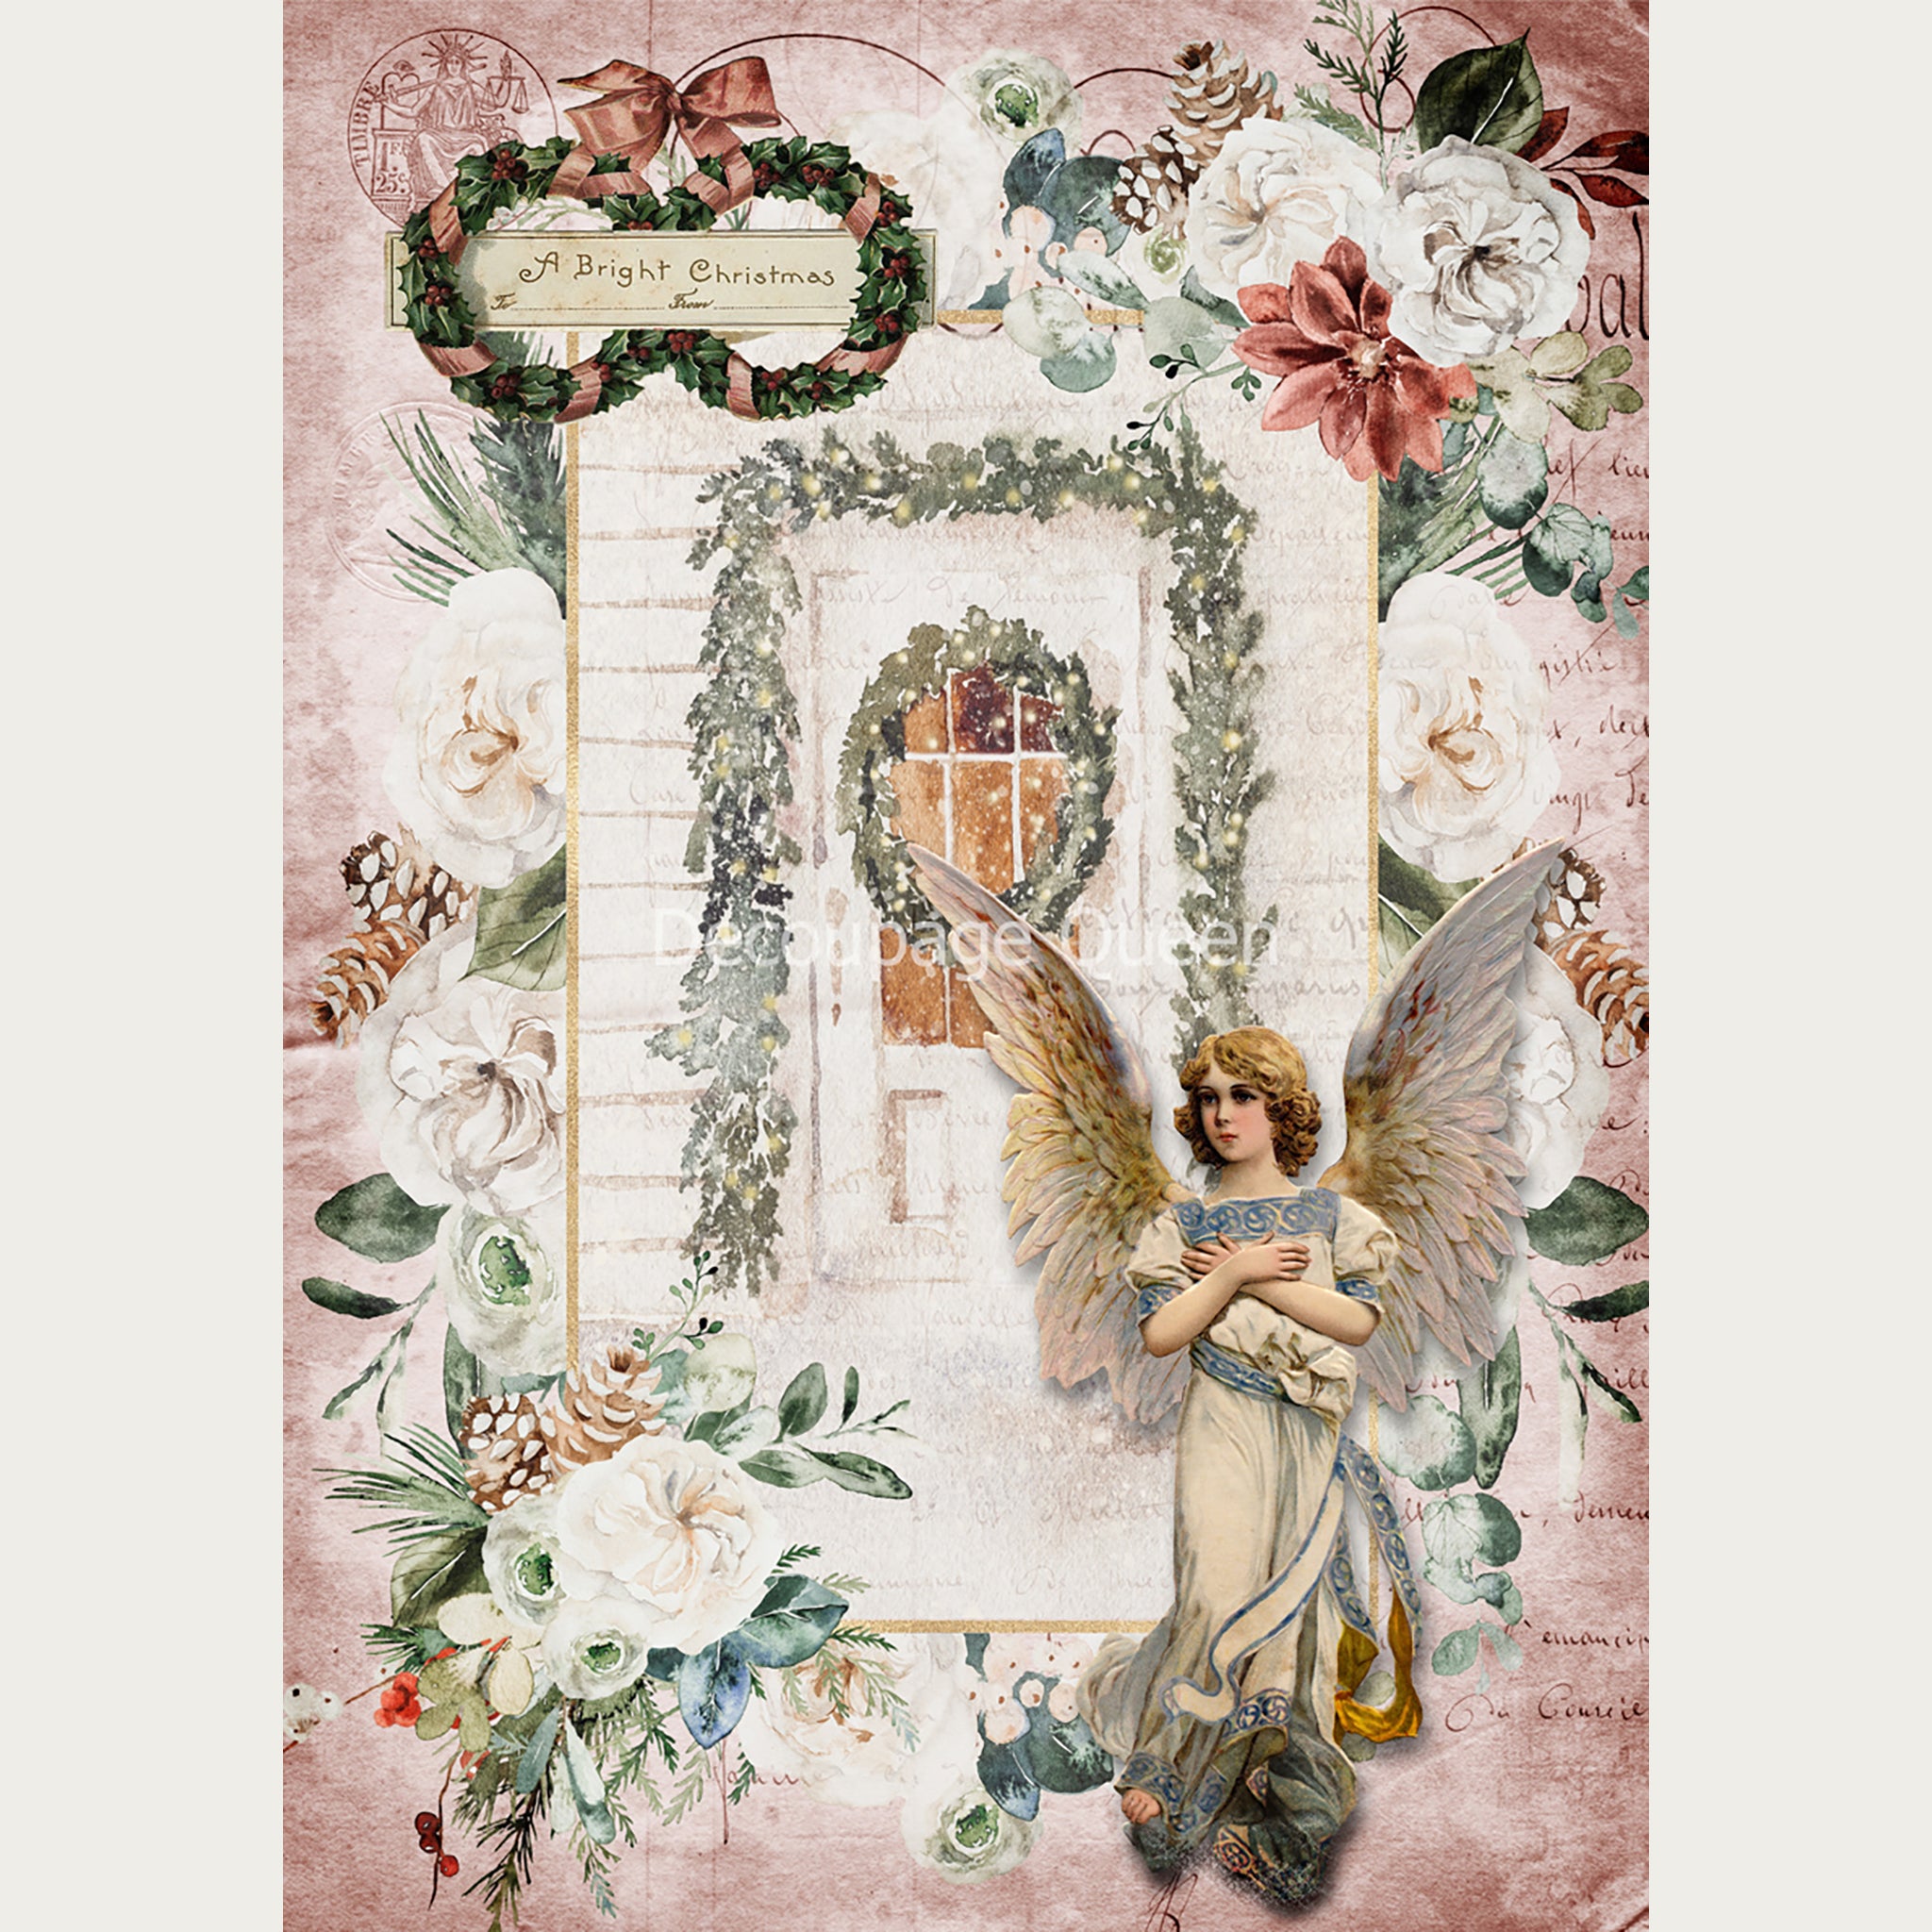 A vintage angel on a background of a white door with a wreath and garland around it in a frame with white flowers, pine cones, and evergreens around the frame.